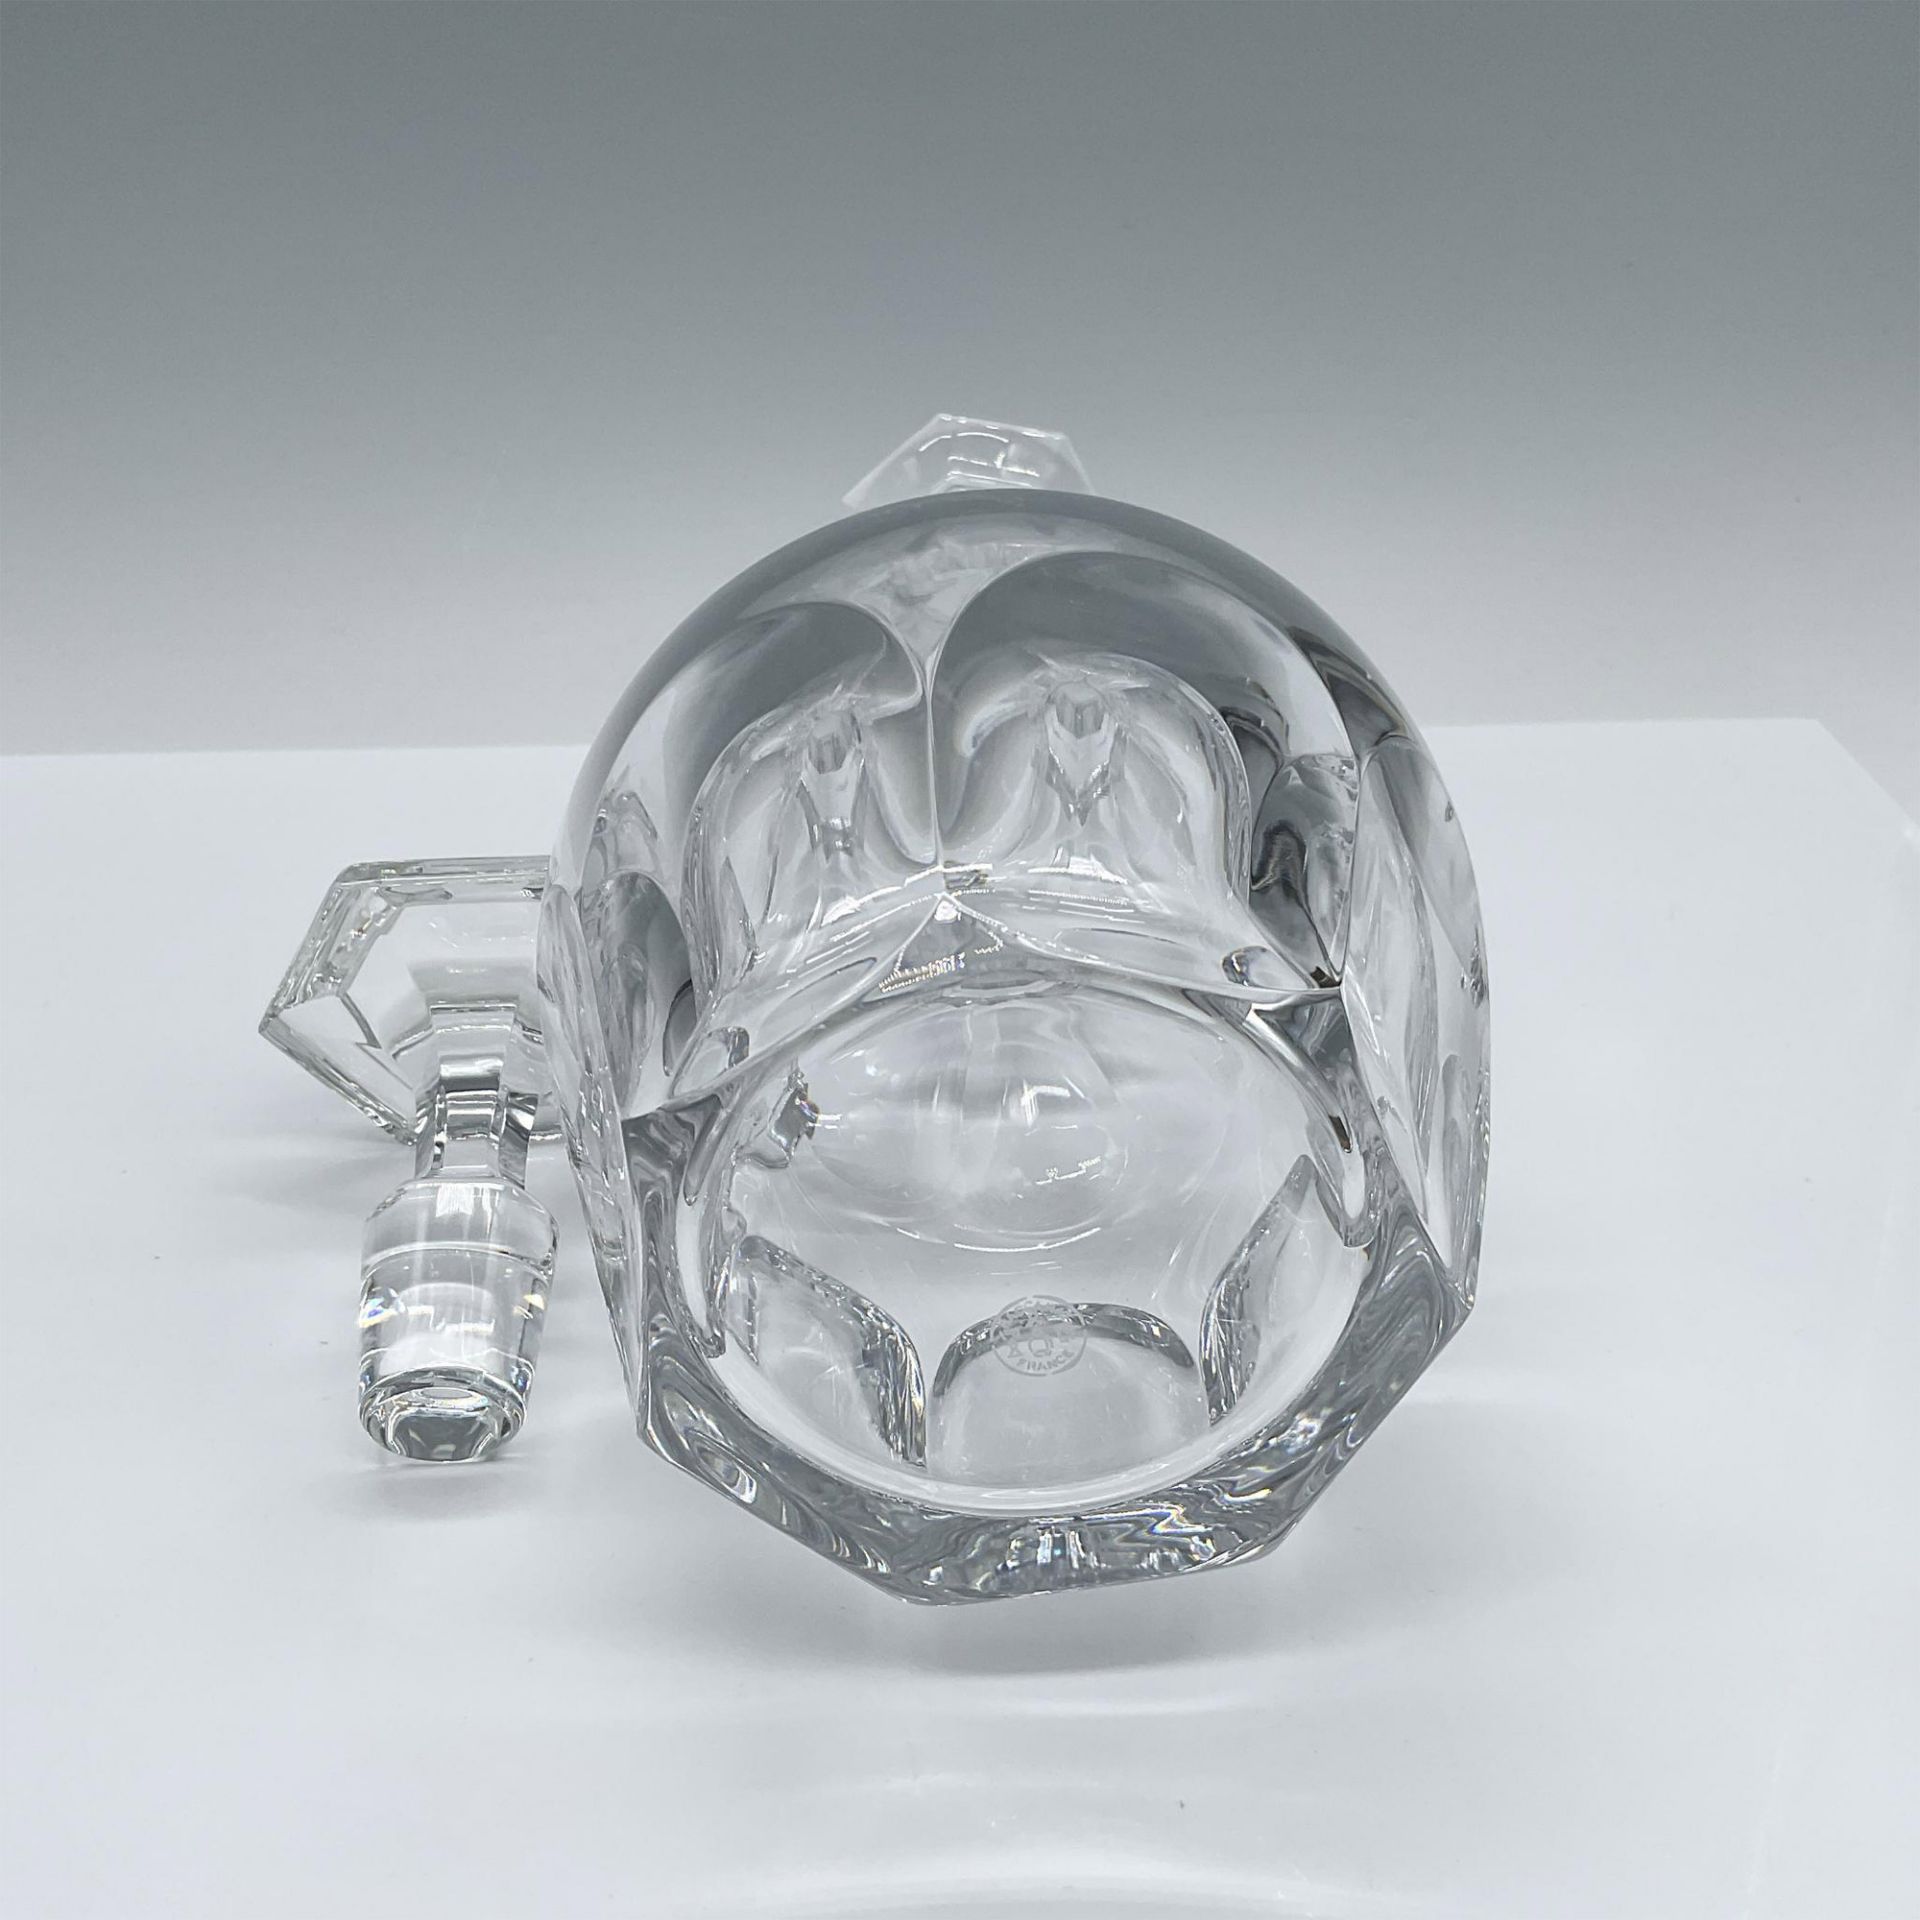 Baccarat Harcourt-Versailles Decanter and Stopper - Image 3 of 3